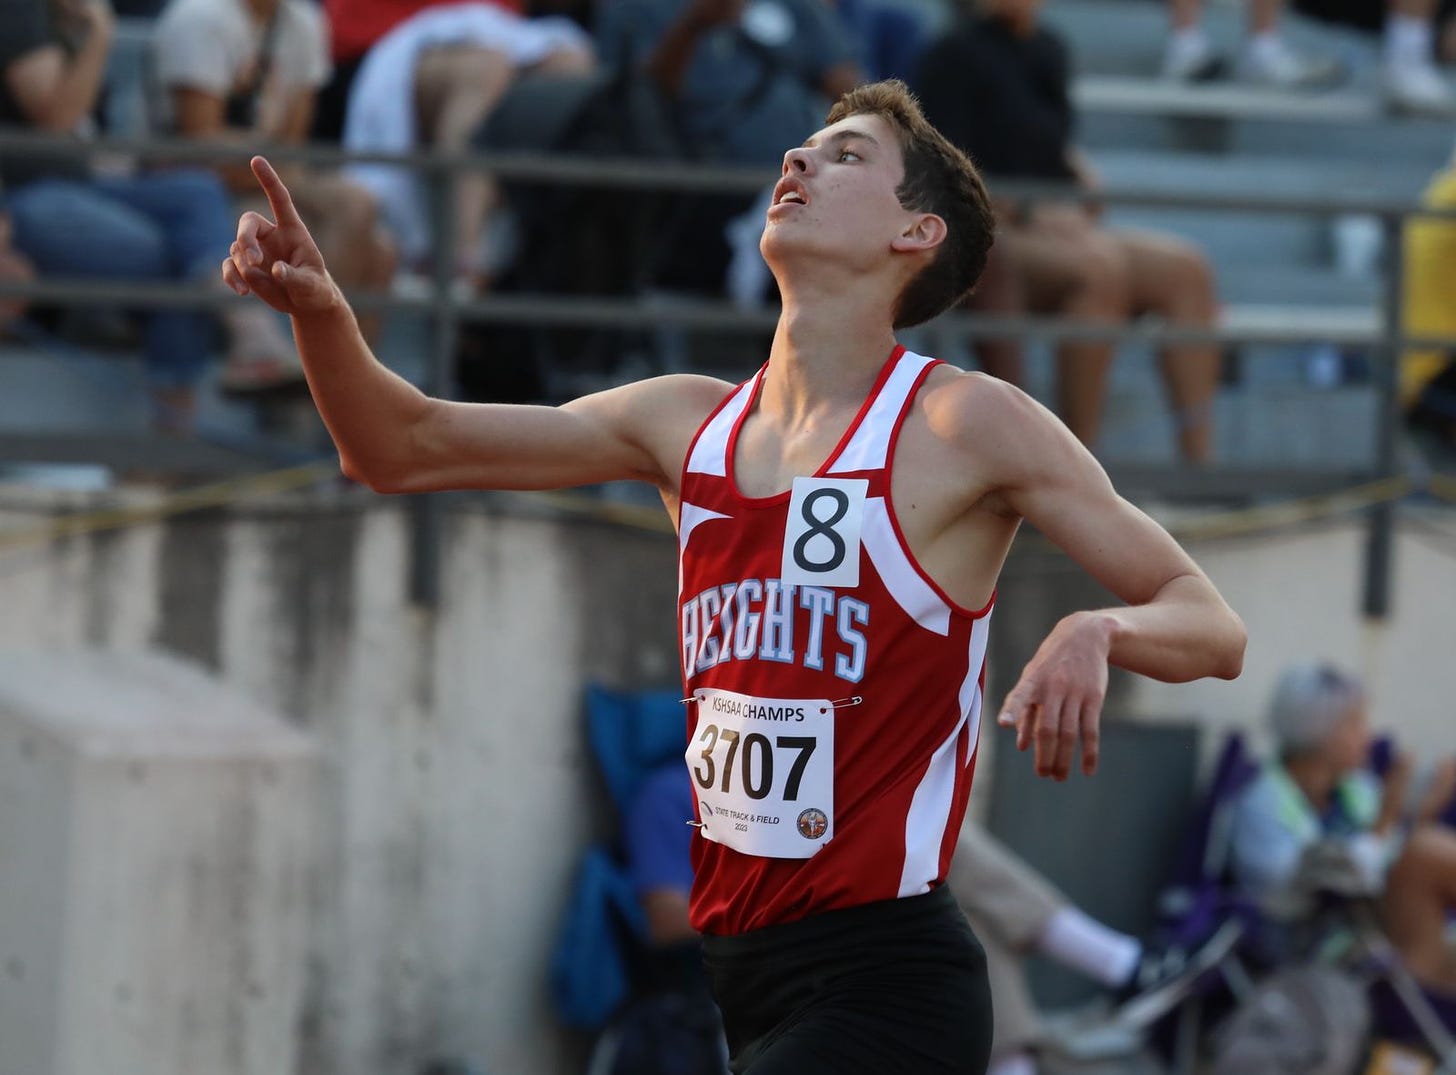 T-Birds' Esquibel earns first state title with win in Class 5A boys 3,200  meters - Top Sports News - The top sports news from Topeka & Shawnee County